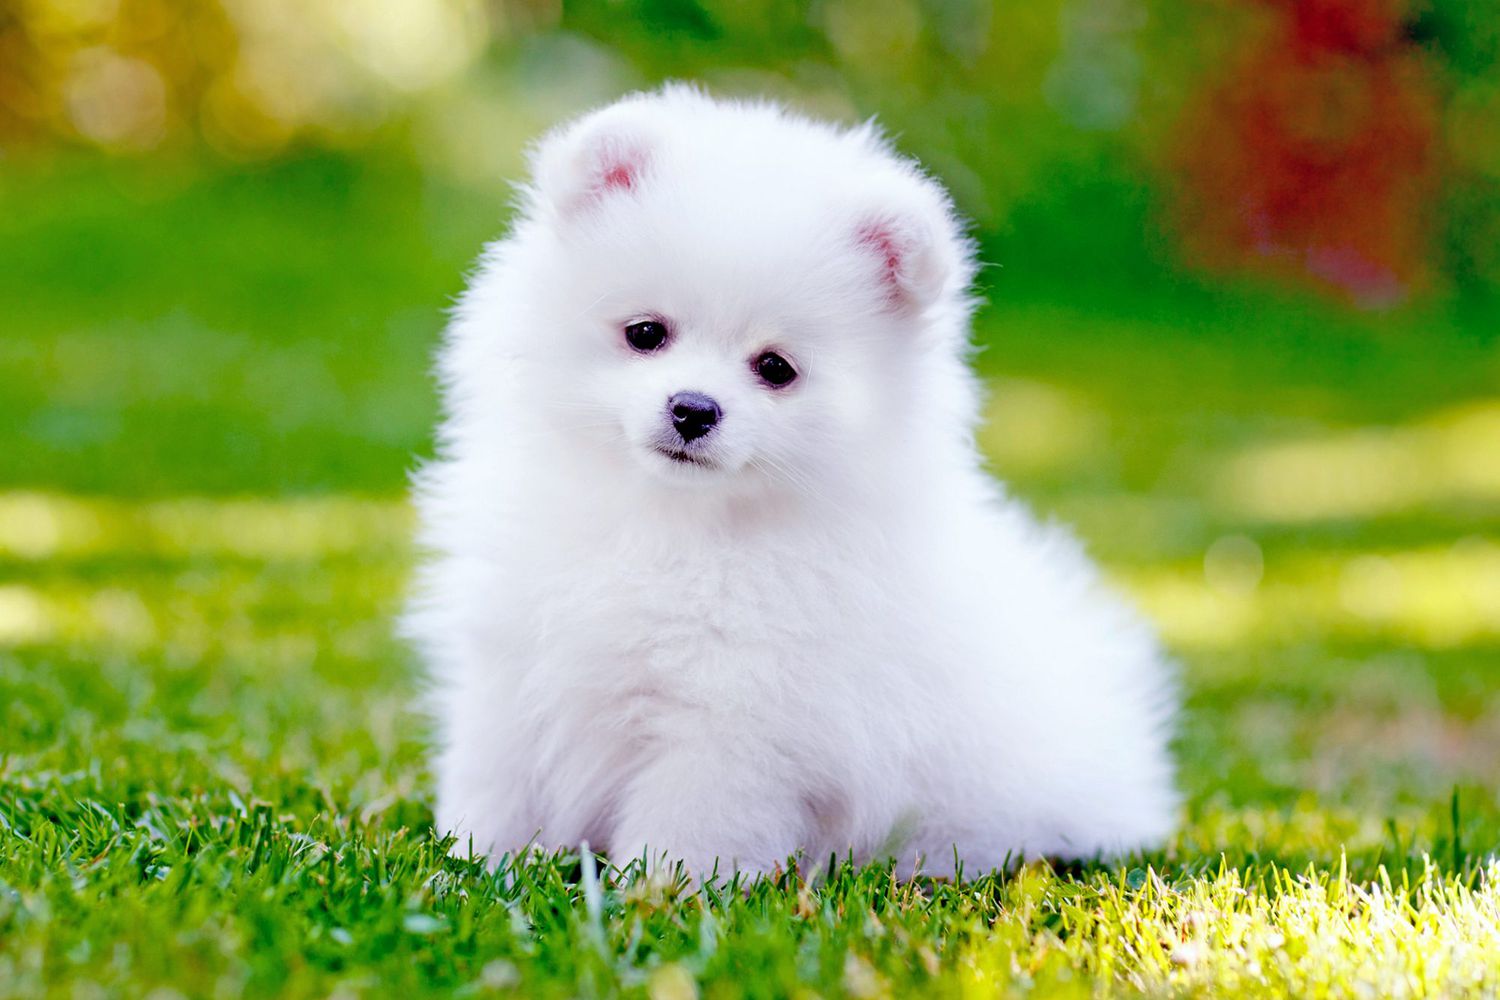 30 Dog Breeds That Have the Cutest Puppies | Daily Paws